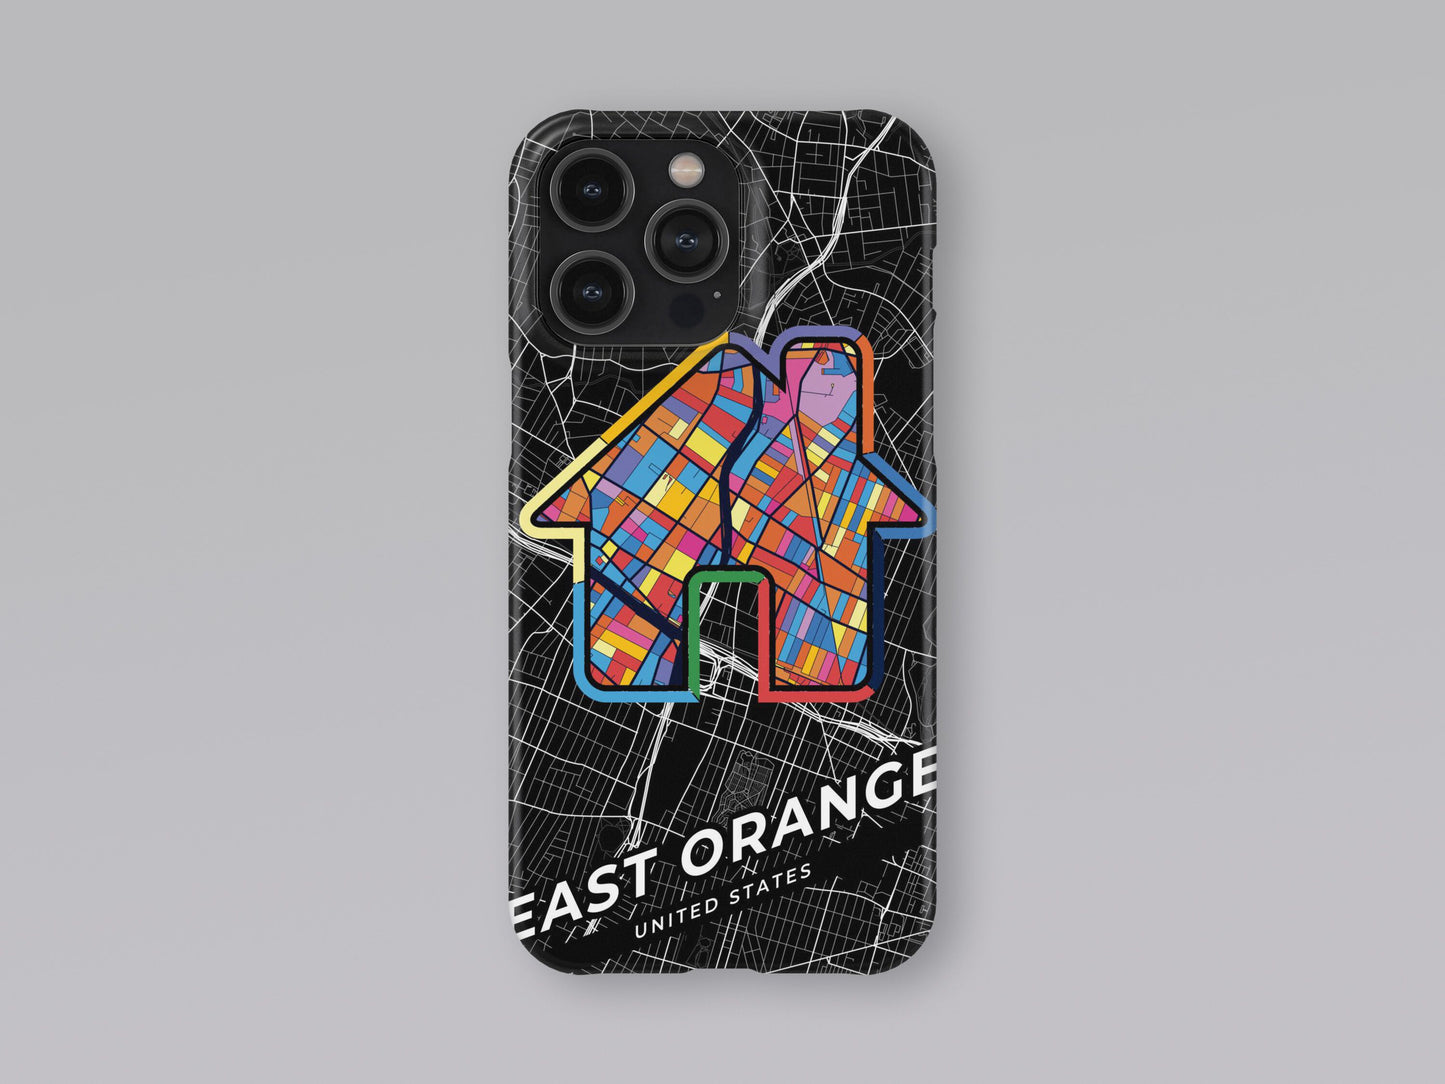 East Orange New Jersey slim phone case with colorful icon. Birthday, wedding or housewarming gift. Couple match cases. 3